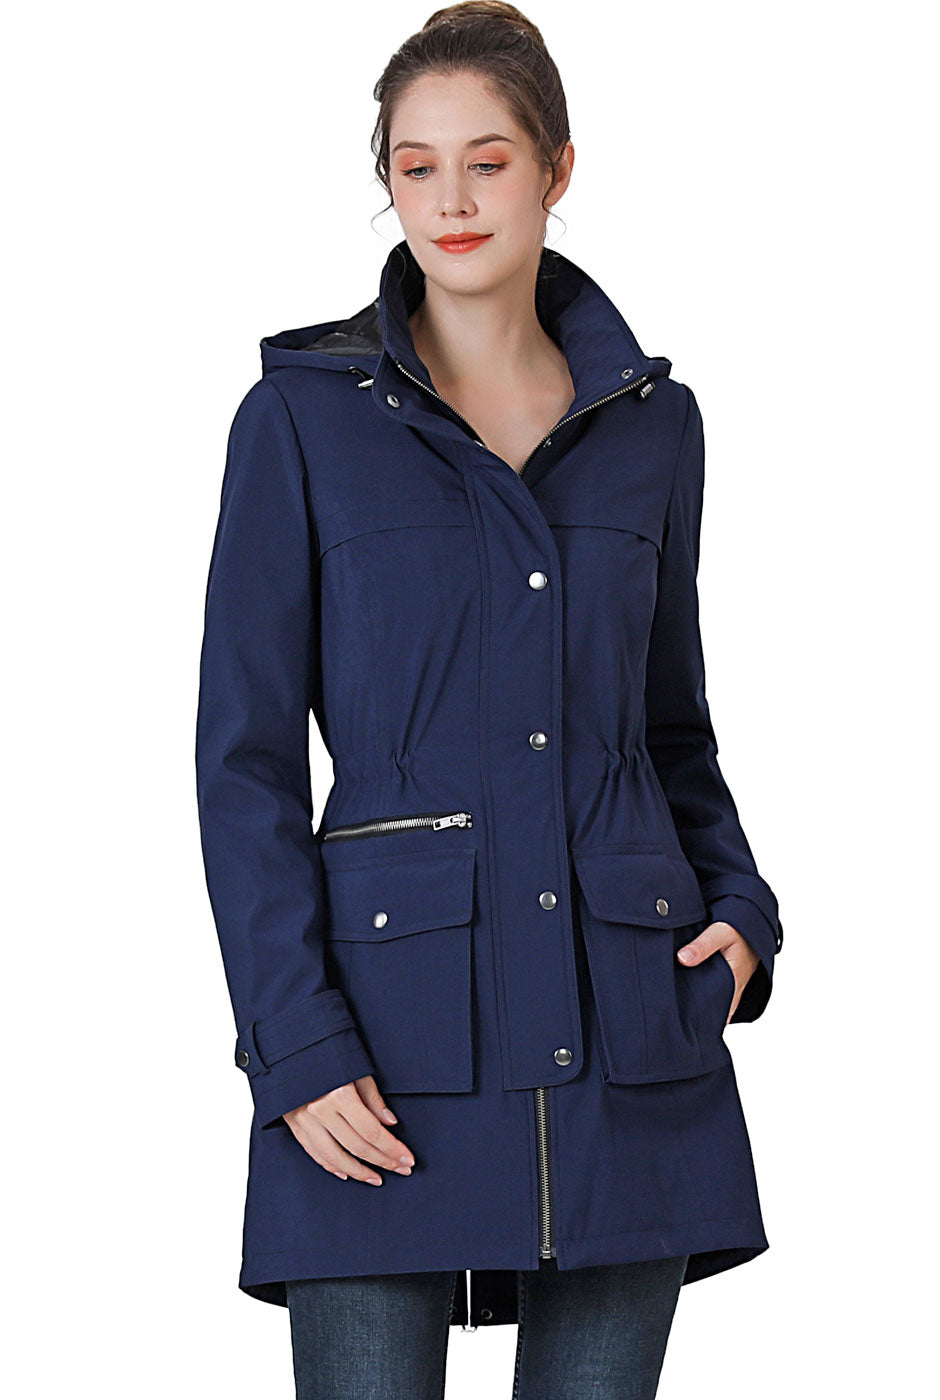 BGSD Women Amelia Waterproof Hooded Parka Coat with Removable Liner